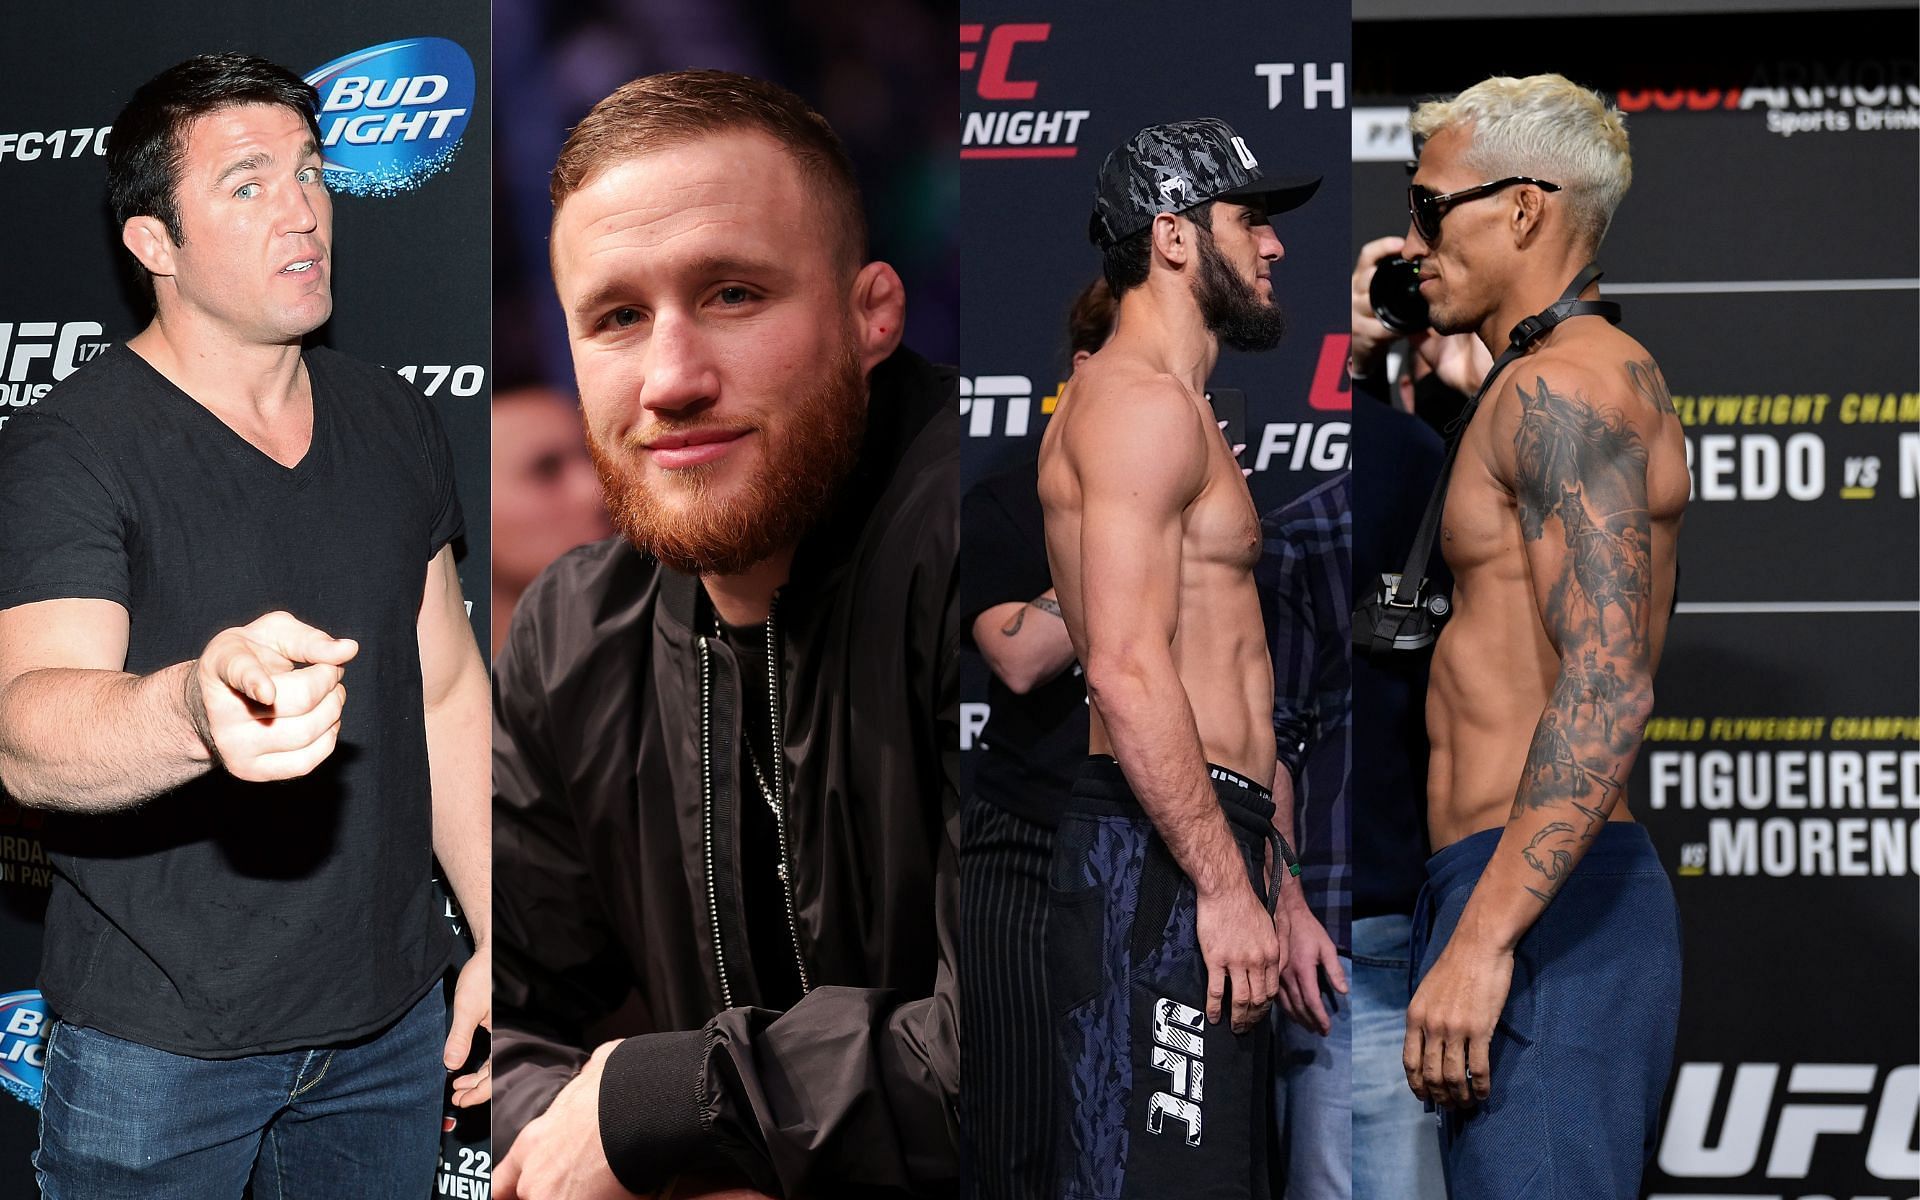 From left to right: Chael Sonnen, Justin Gaethje, Islam Makhachev, and Charles Oliveira